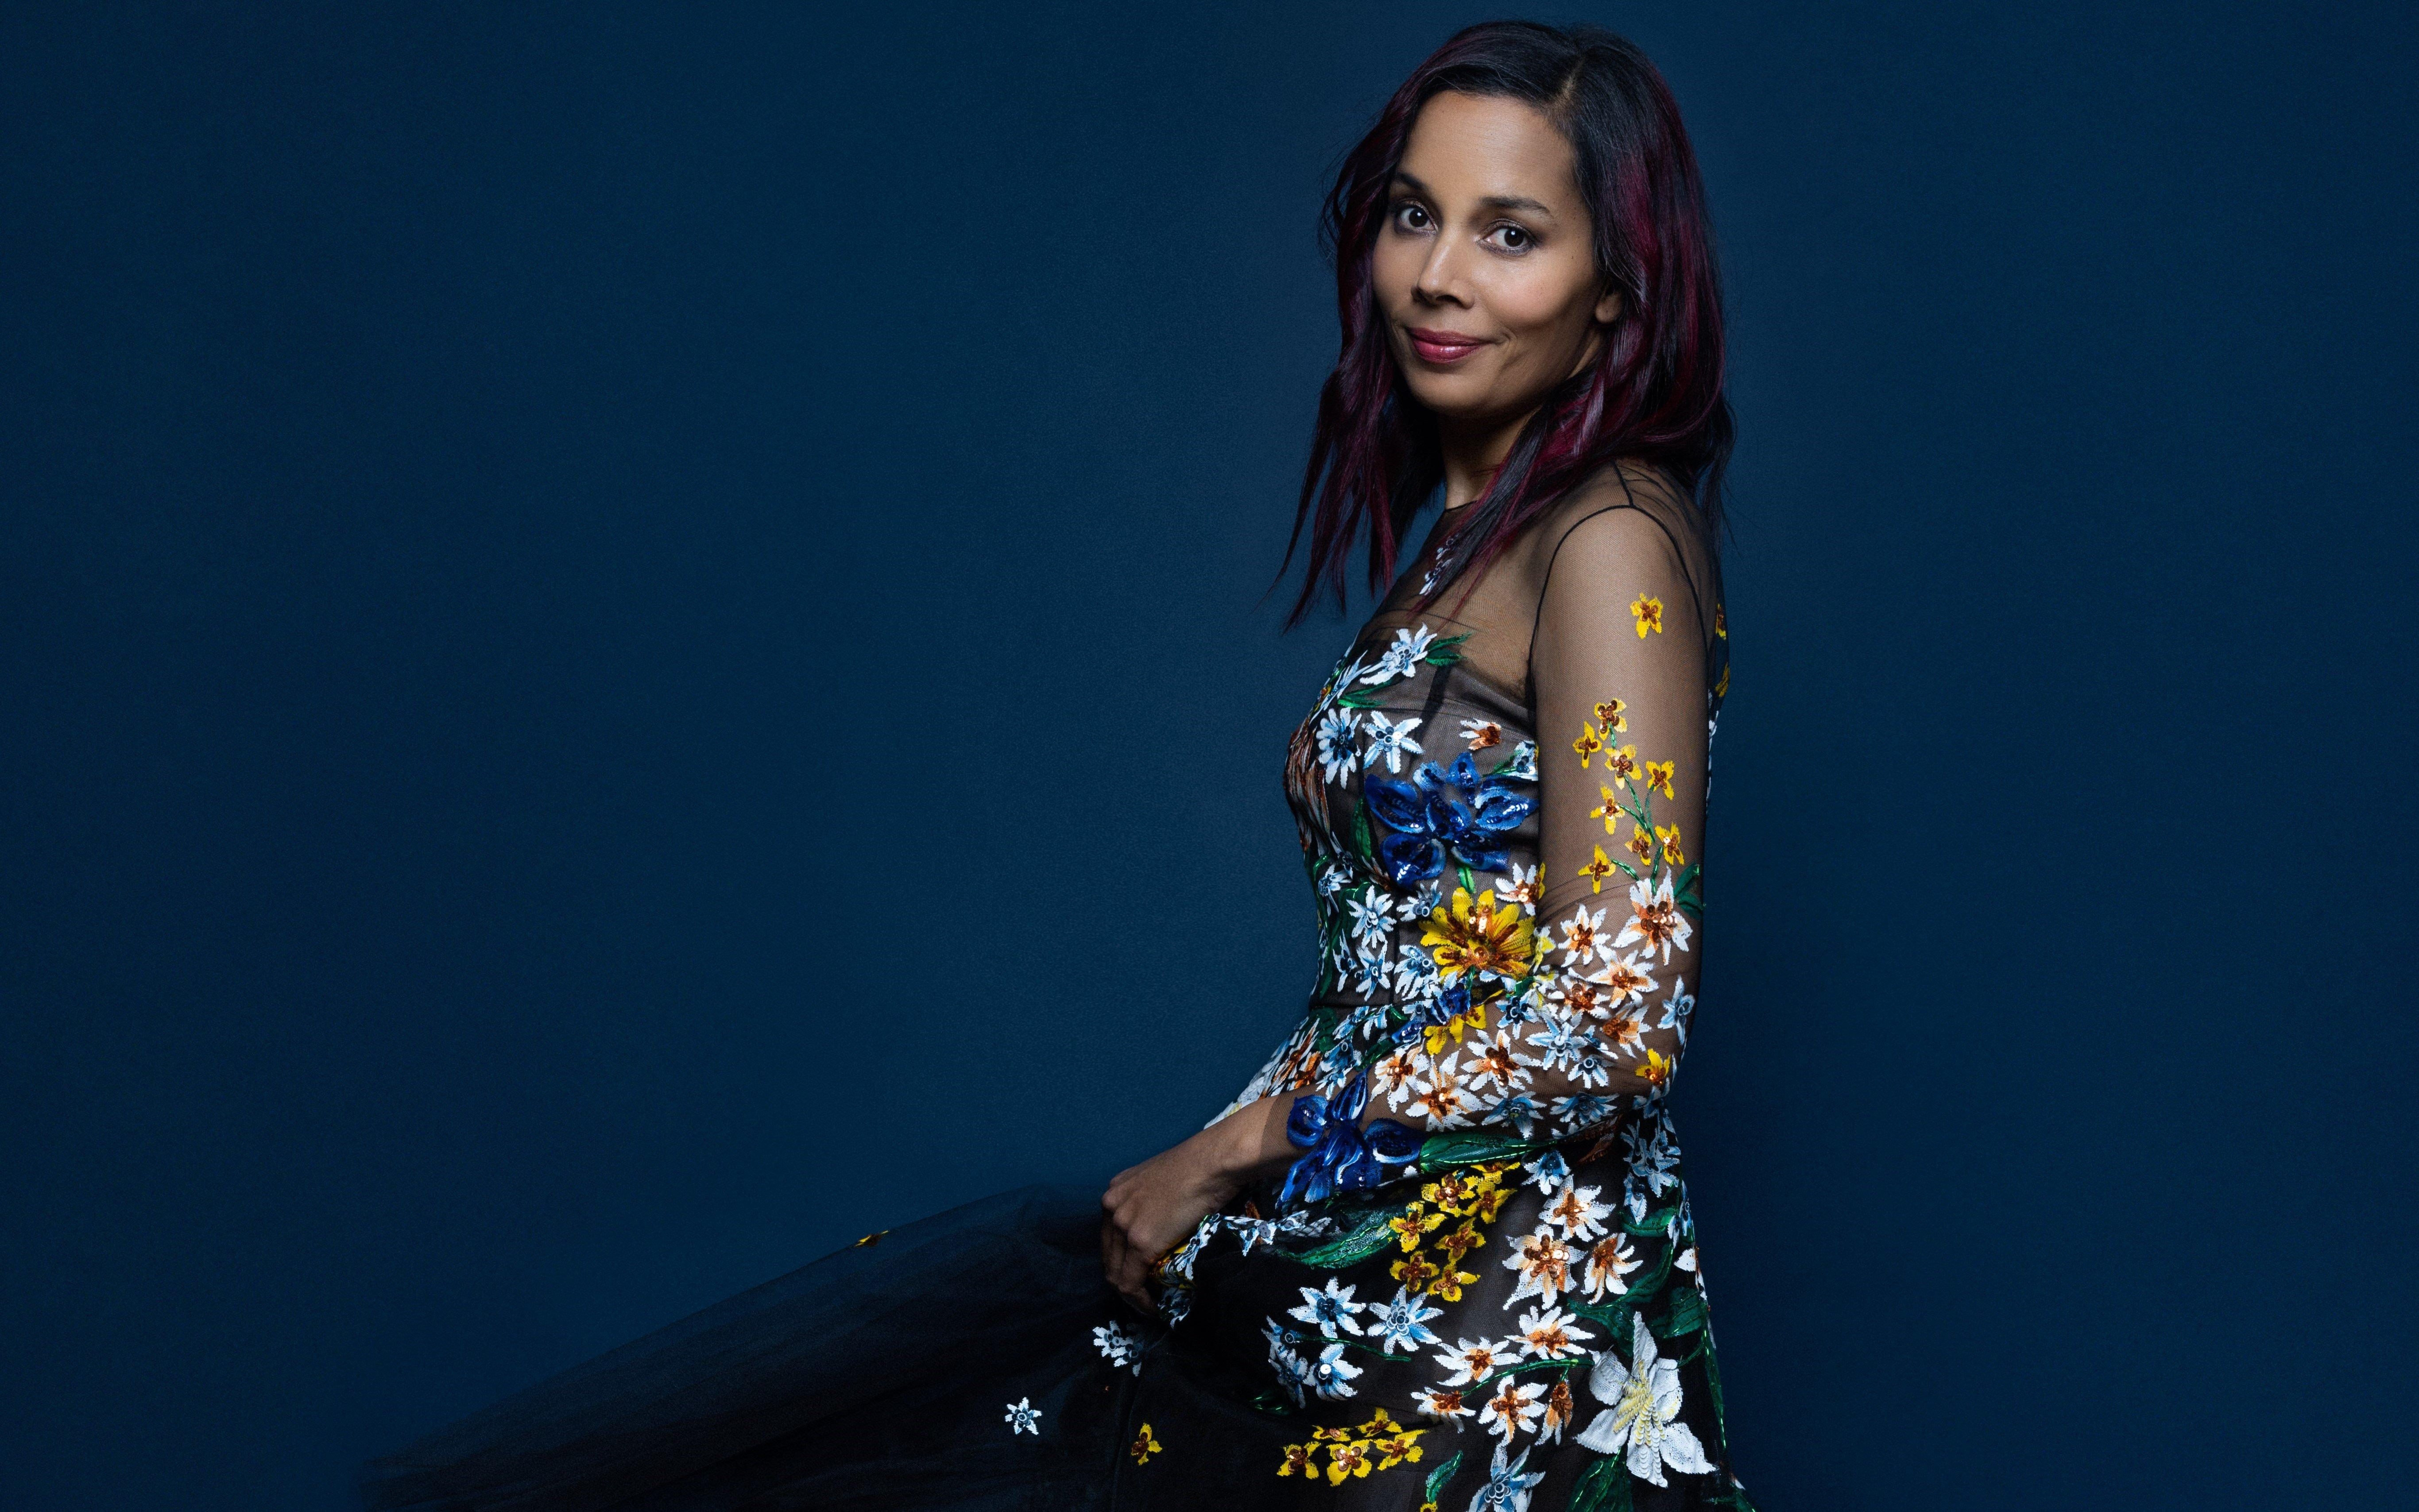 Rhiannon Giddens On New Album 'You're The One'